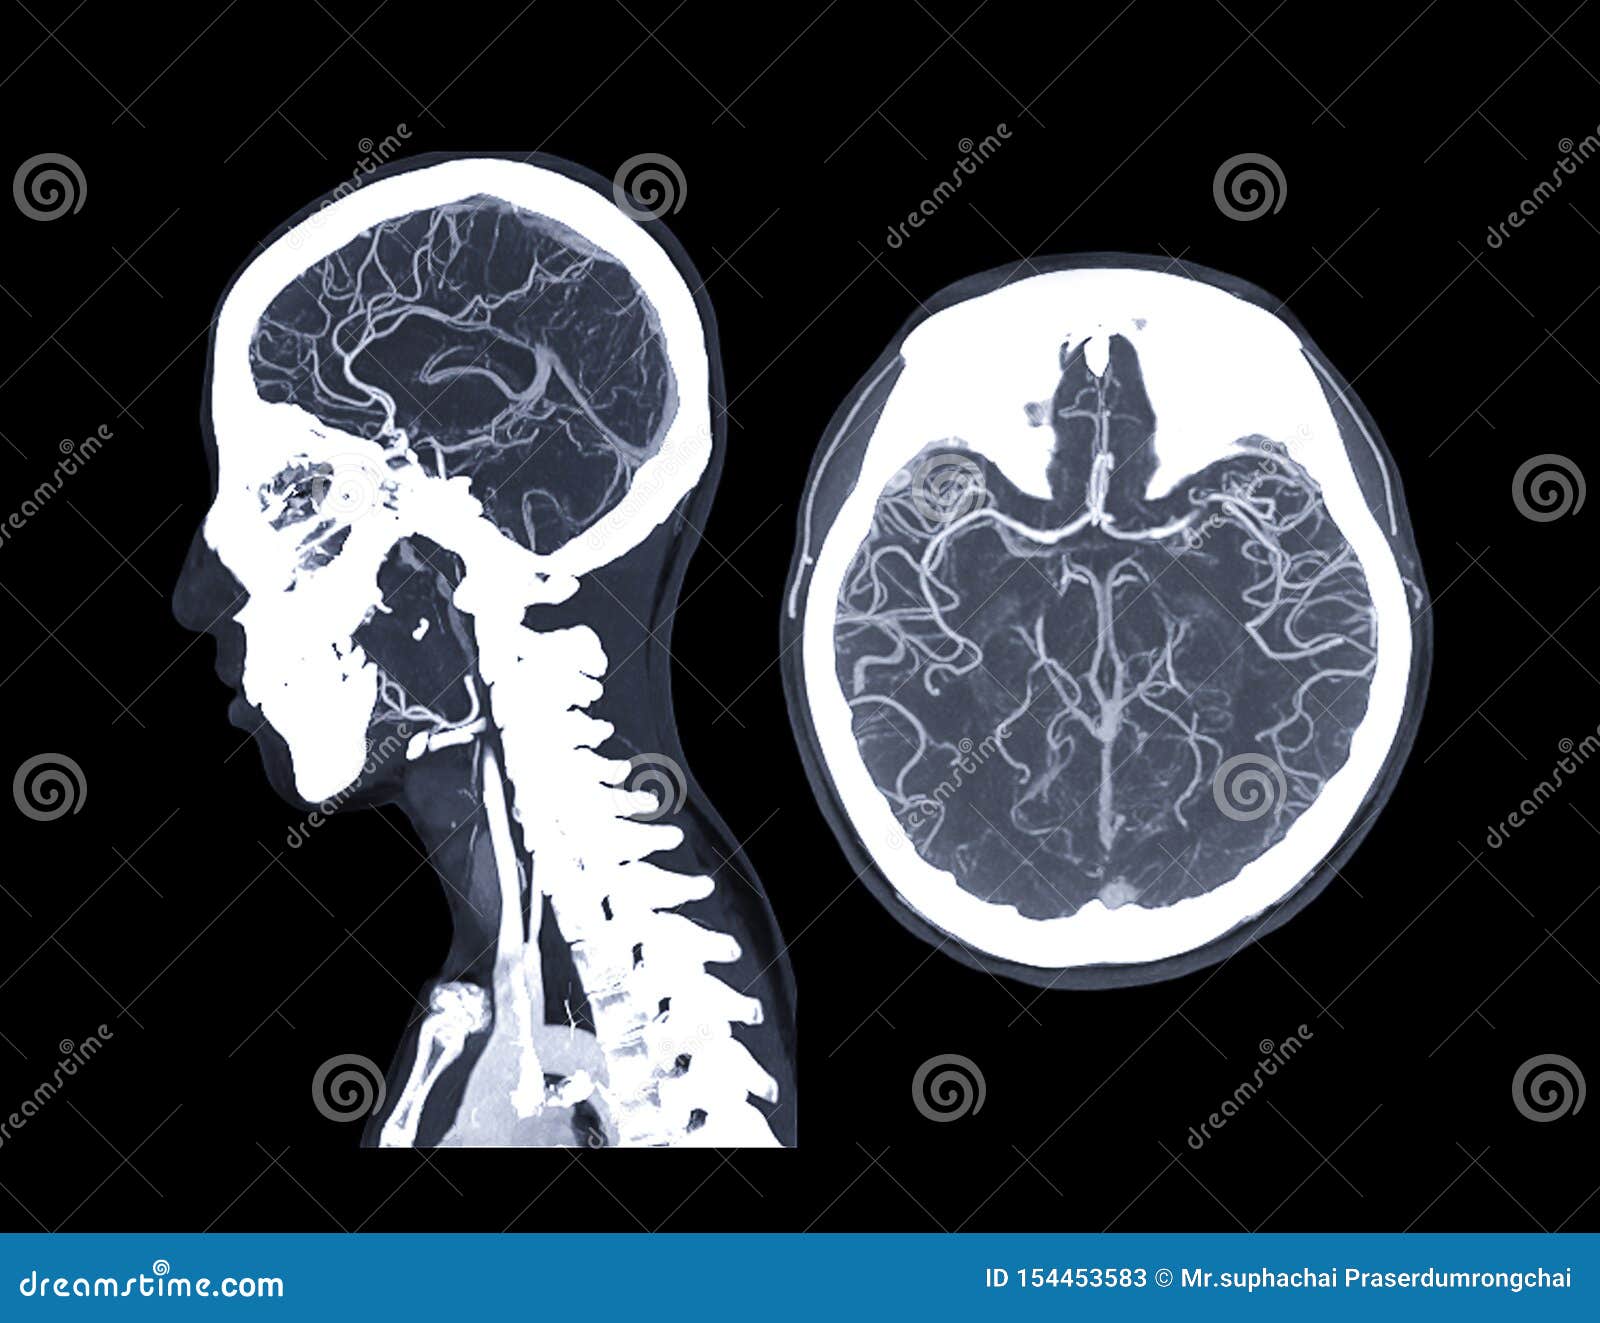 cta brain or ct angiography of the brain .